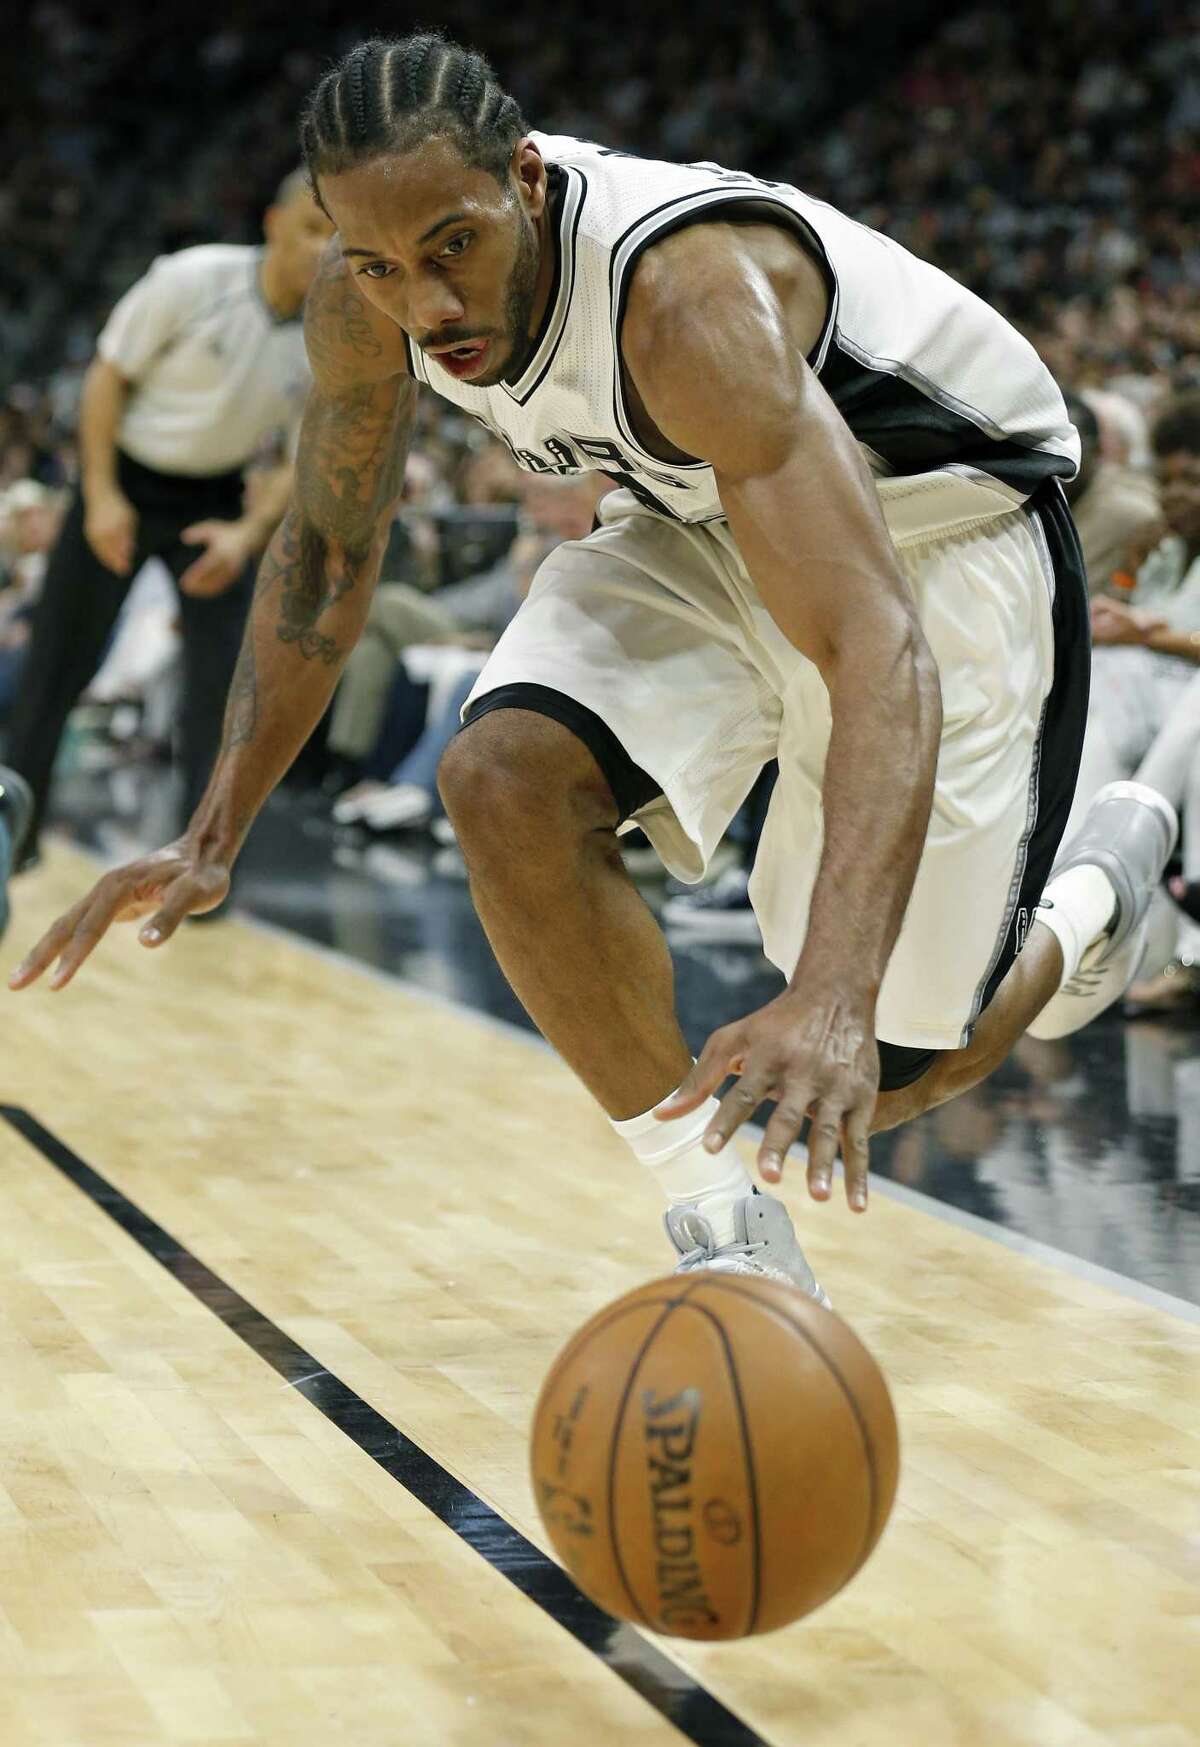 Spurs’ Kawhi Leonard chases after a loose ball during first half action of Game 2 in the first round of the Western Conference playoffs against the Memphis Grizzlies on April 17, 2017 at the AT&T Center.